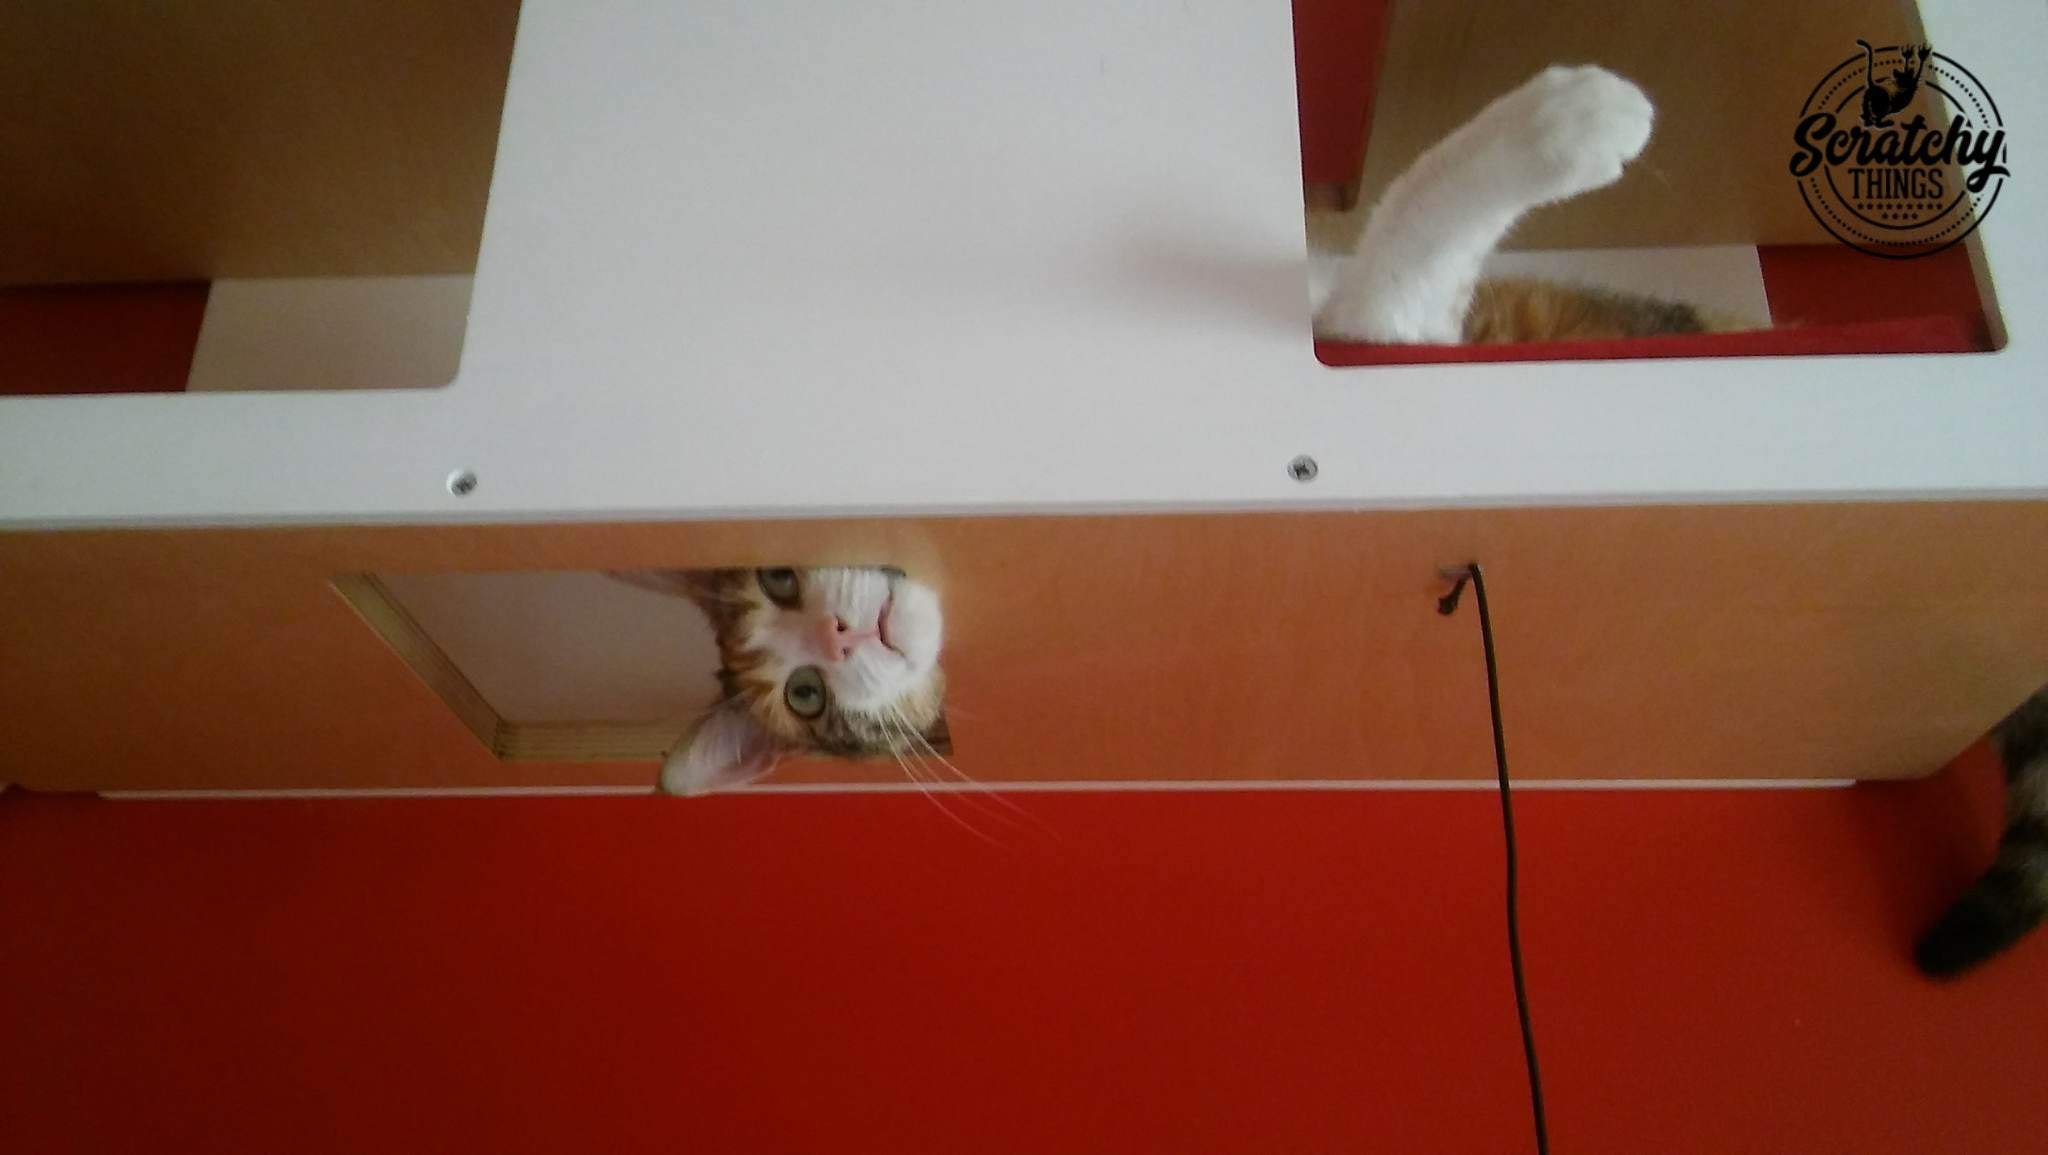 Cat Ceiling Shelf Bed - Wally Tunnel Top - Scratchy Things Premium Pet Furniture